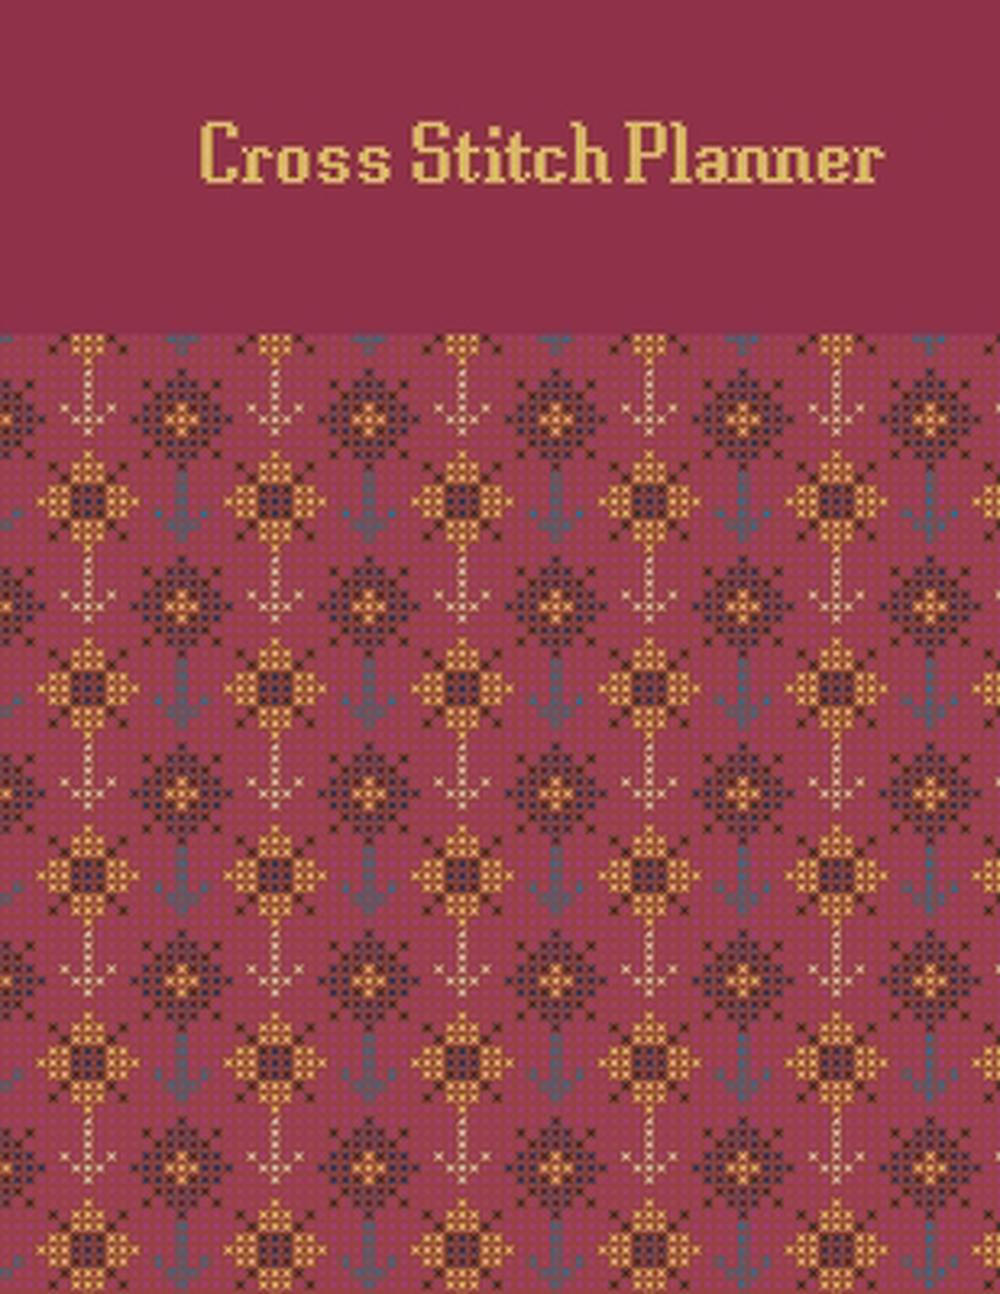 10-x-10-graph-paper-printable-10-count-cross-stitch-grid-free-make